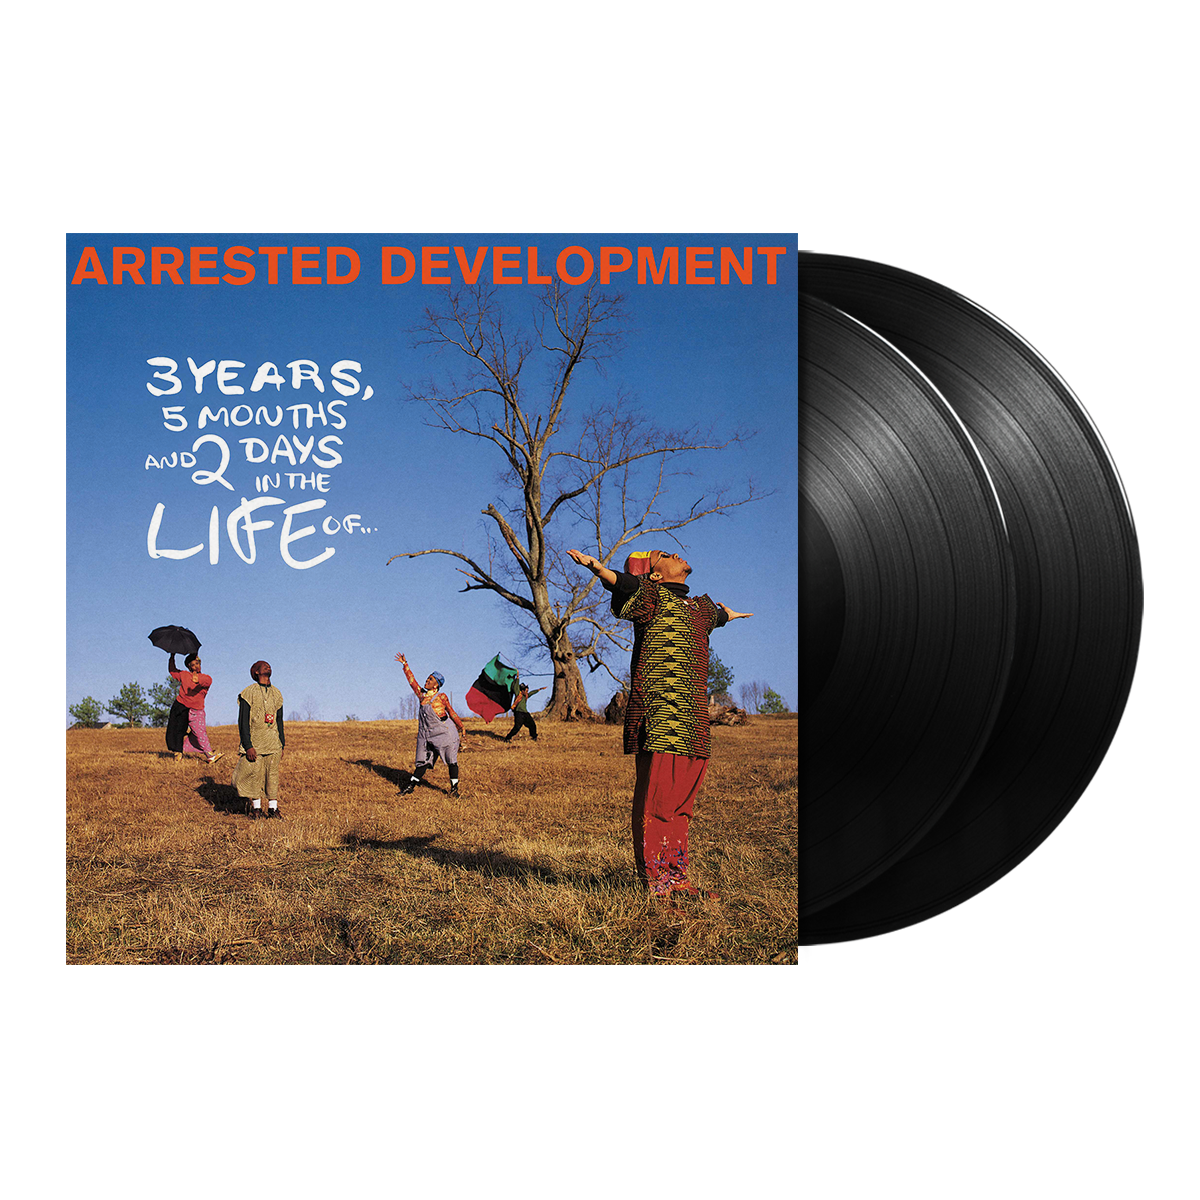 Arrested Development - 3 Years, 5 Months and 2 Days in the Life of... 2LP